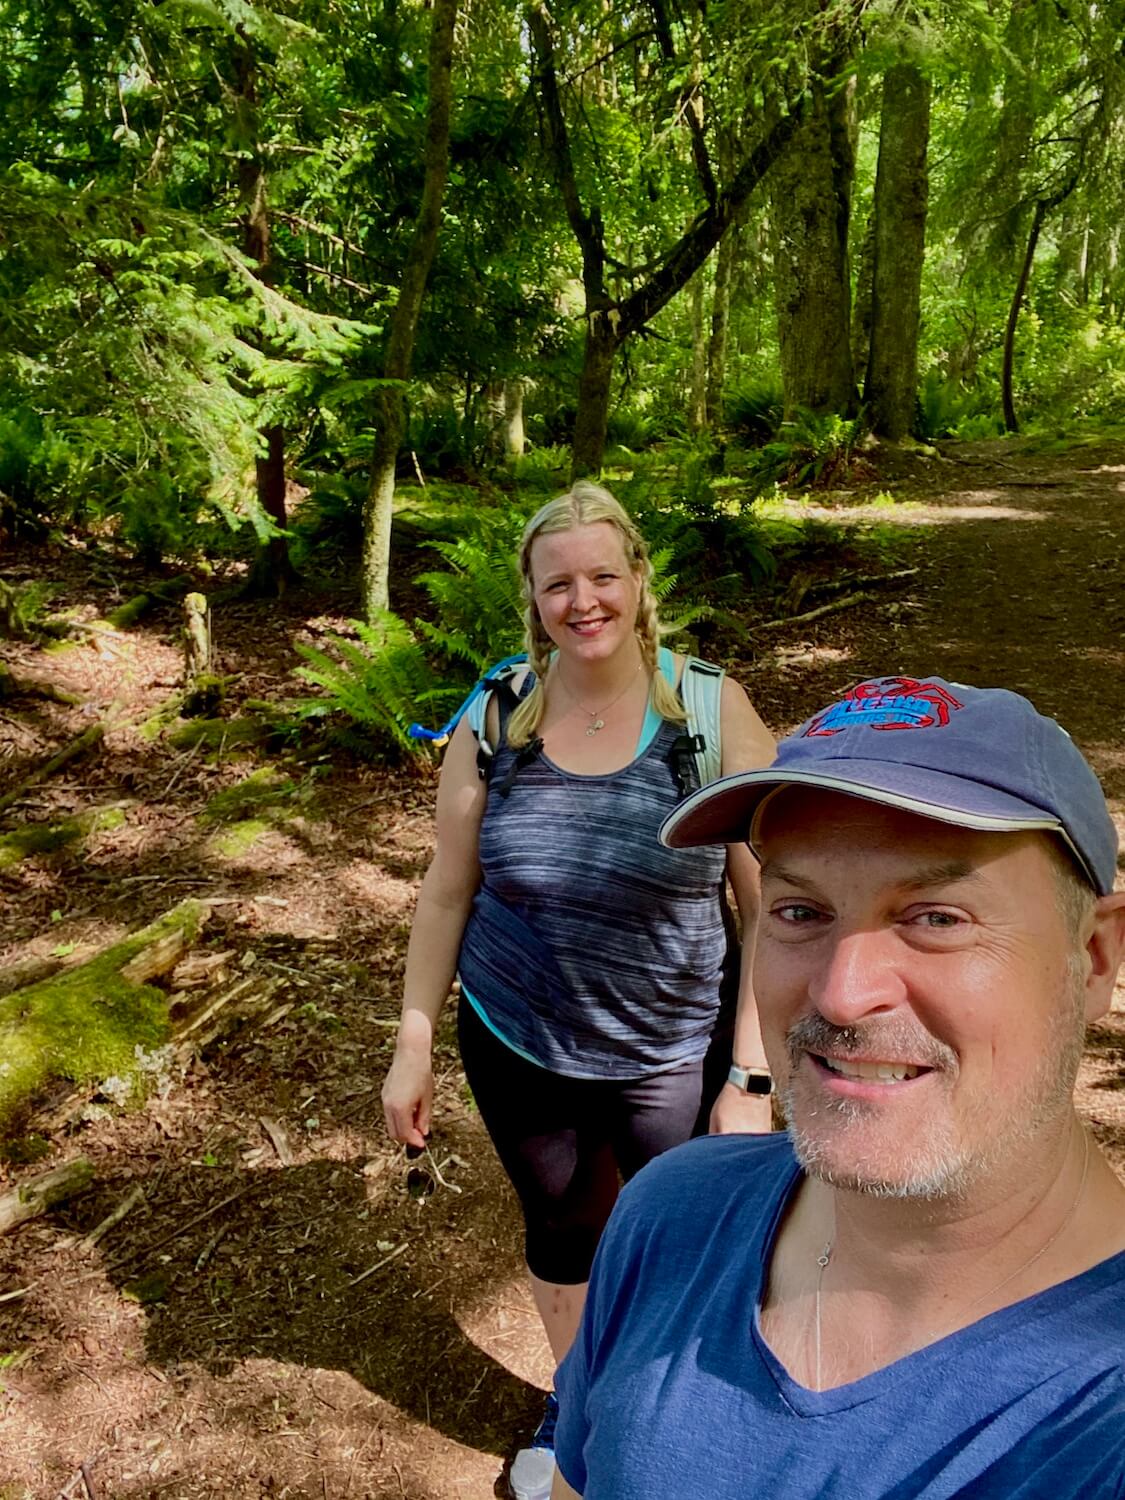 Matthew Kessi and Jeanne Jones are hiking in the trails deep in the forest of Point Defiance Park in Tacoma Washington.  Matthew wears a blue cap and t-shirt and is smiling while Jeanne is wearing a blue tank top.  They are surrounded by rich green trees with thick leaves and a sawdust trail on the forest floor. 